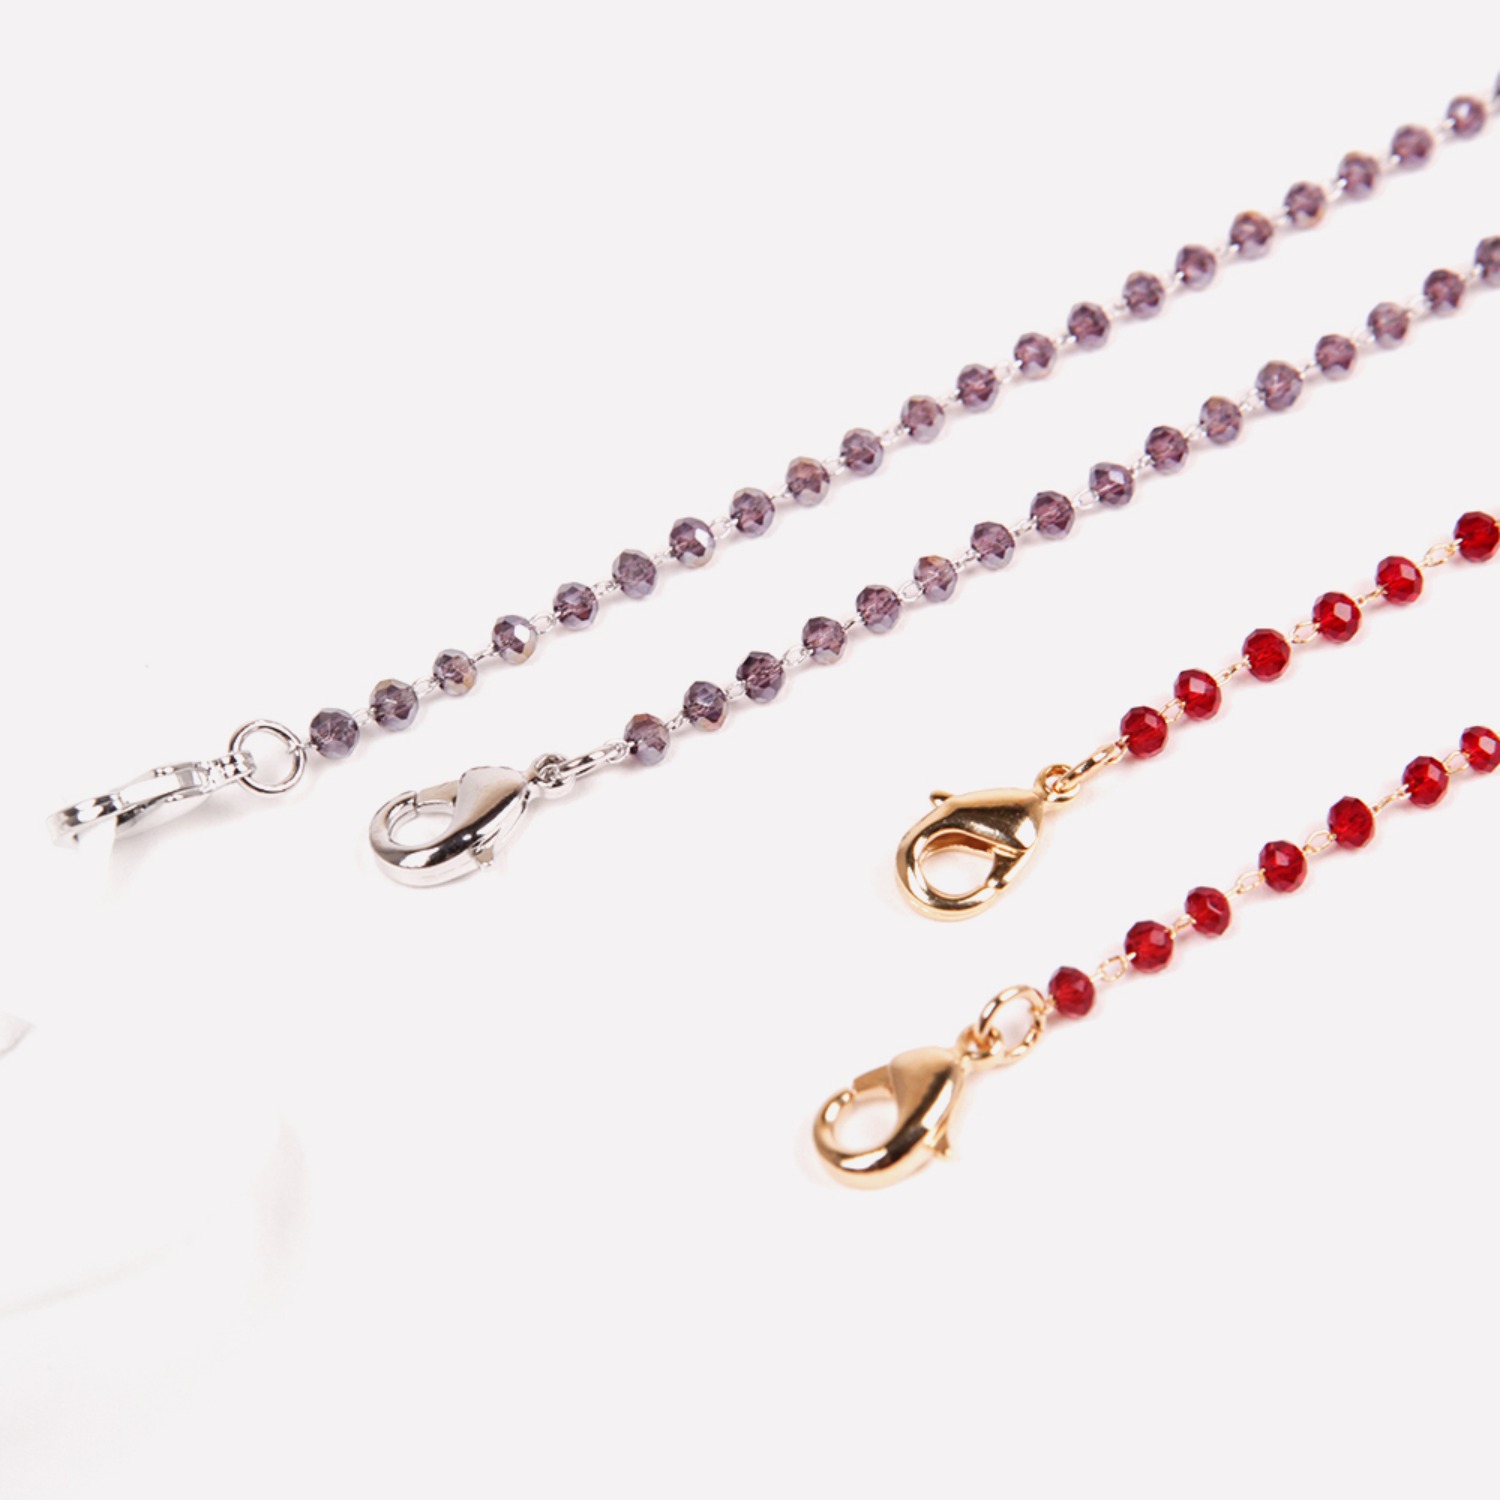 M.Emma Crystal Chain _ 2 color (Ruby red, Lavender grey)